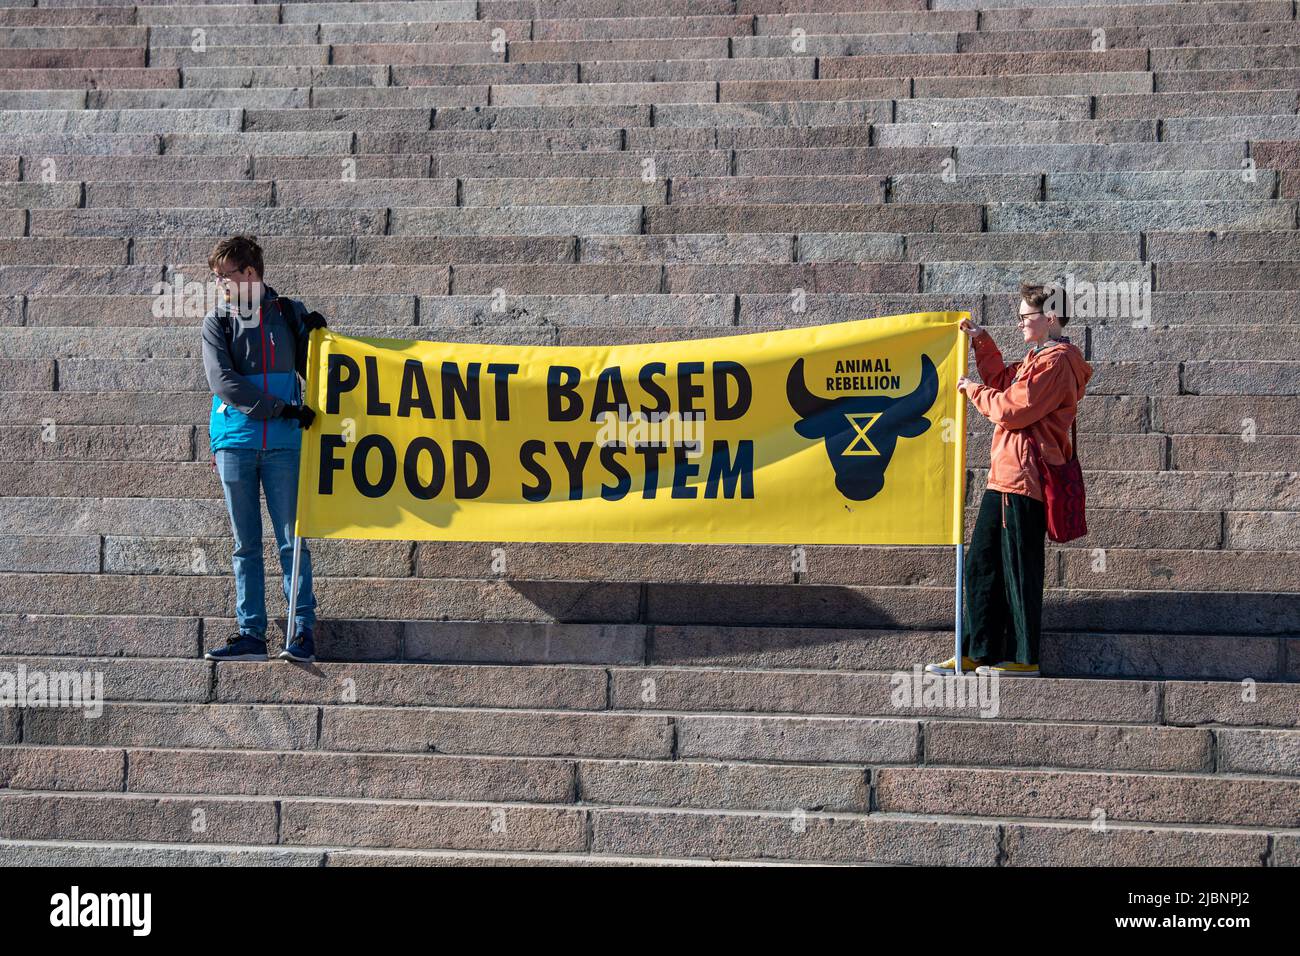 Two people holding a yellow banner demanding plant based food system on Helsinki Cathdedral steps in Helsinki, Finland Stock Photo